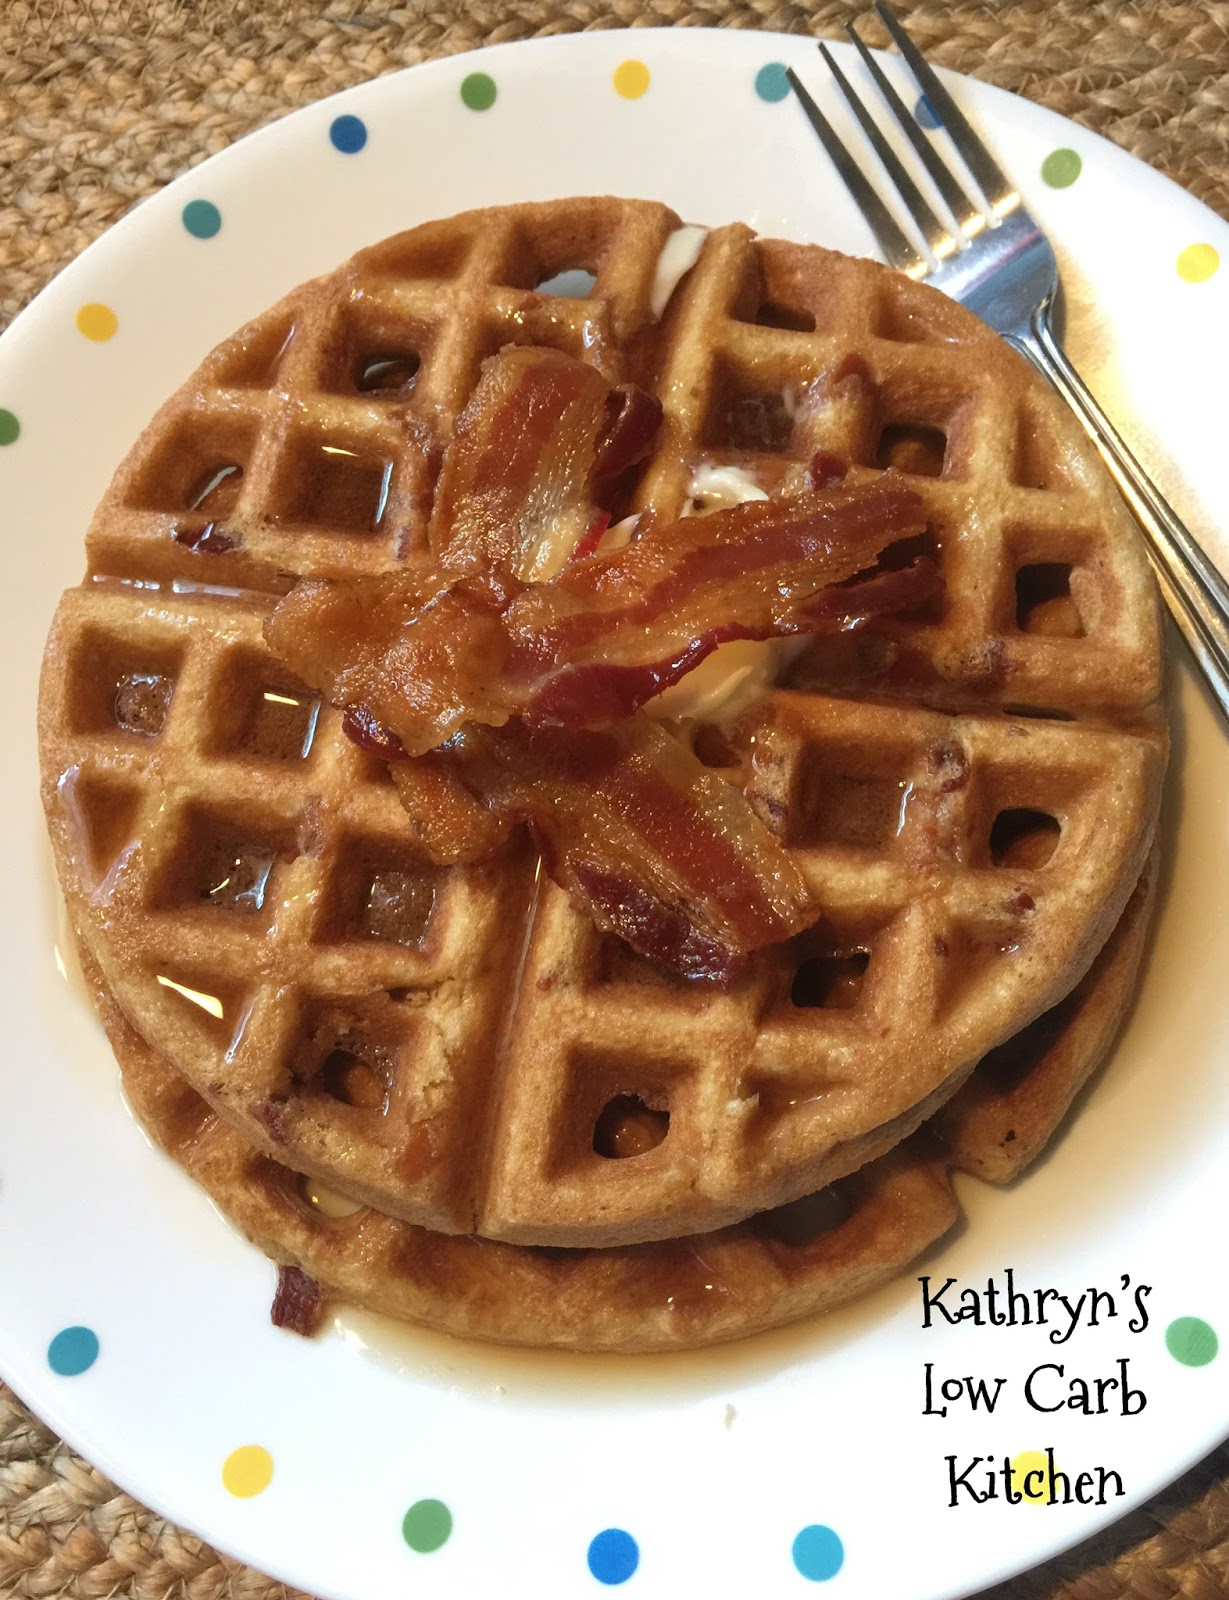 Kathryn's Low Carb Kitchen: Maple Bacon Waffles